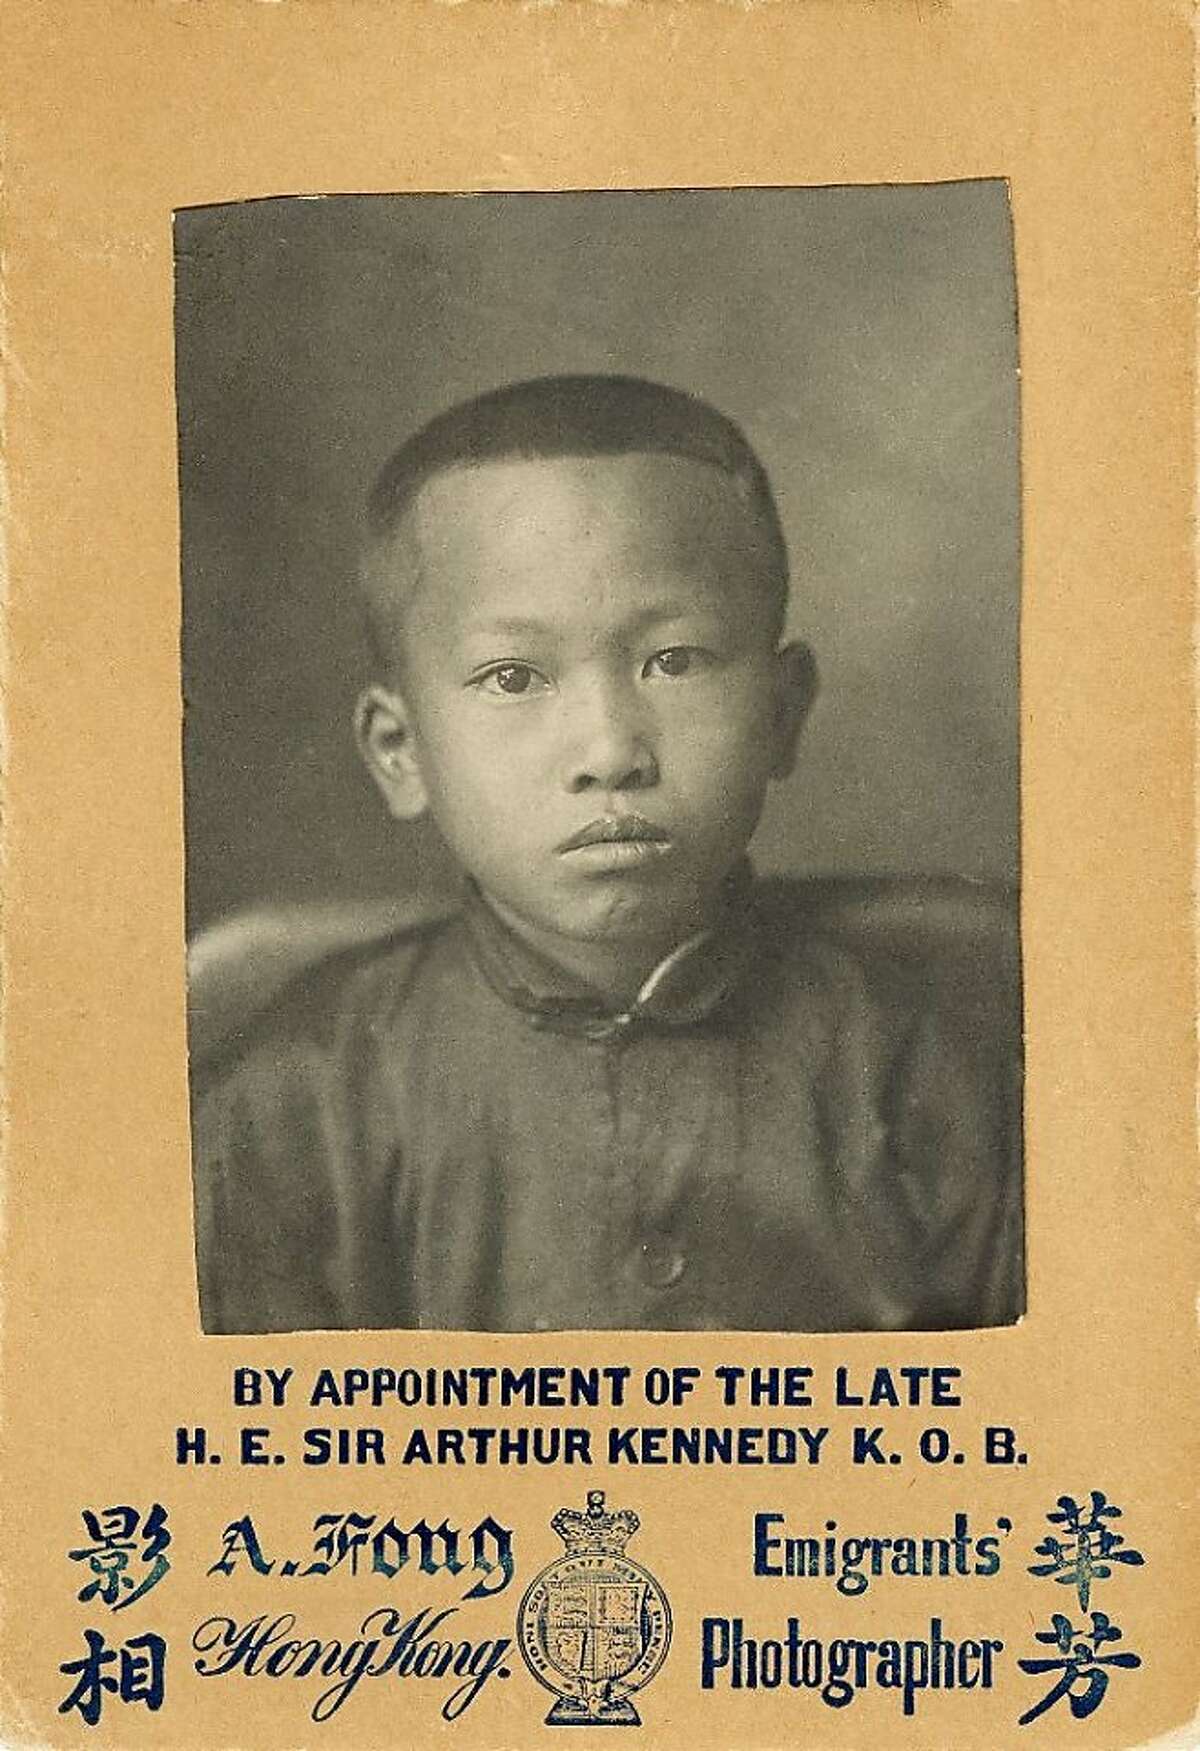 Artist Tyrus Wong, 102, subject of an exhibition at the Walt Disney Family Museum for his work on "Bambi." Pictured: his Angel Island immigration photo.